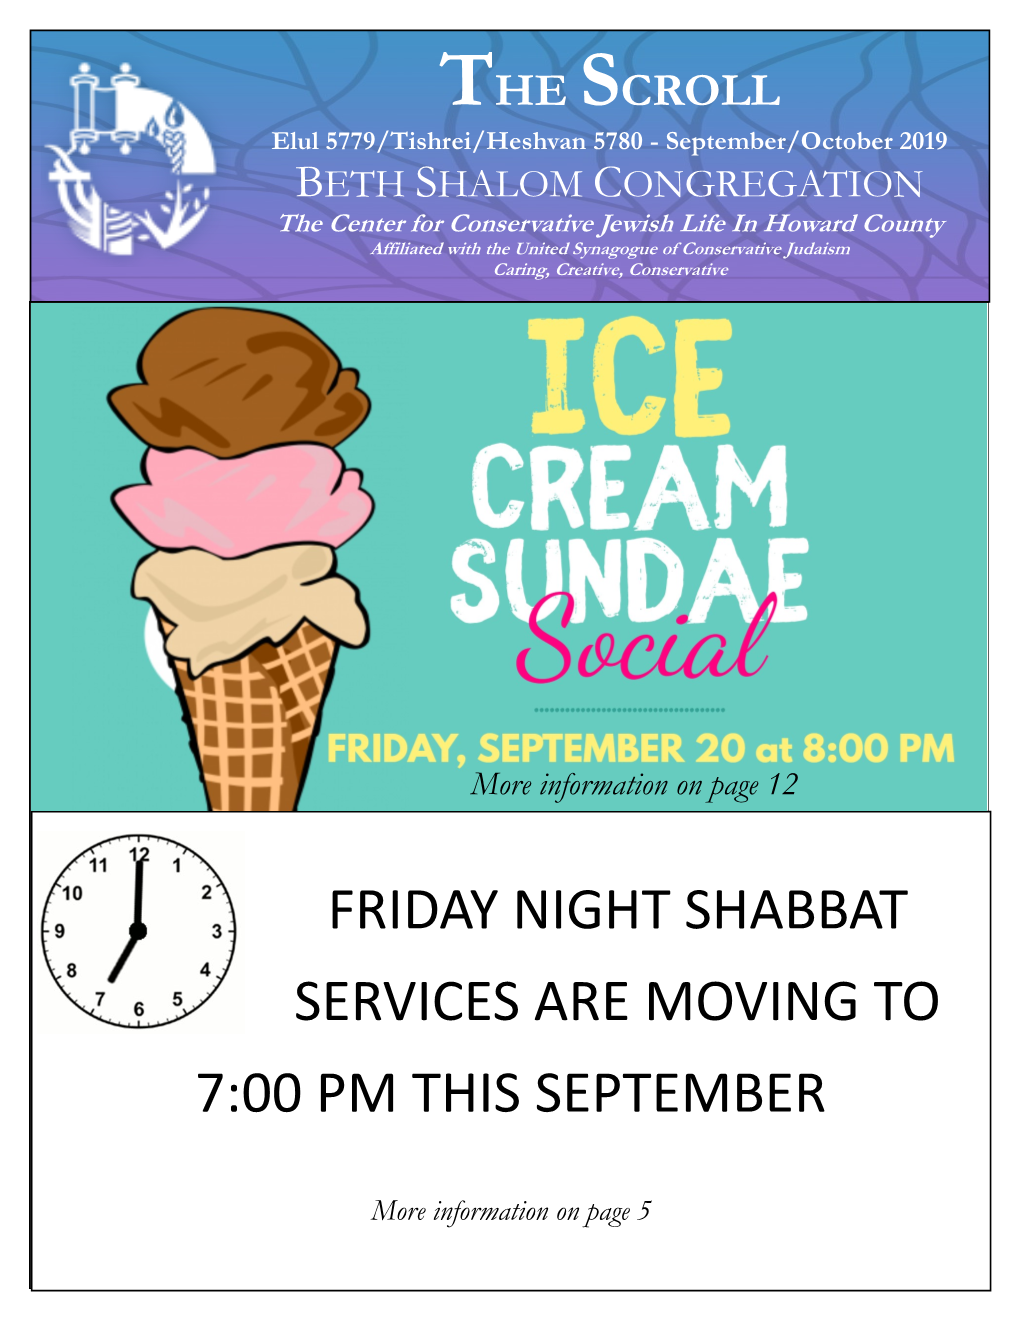 Friday Night Shabbat Services Are Moving to 7:00 Pm This September